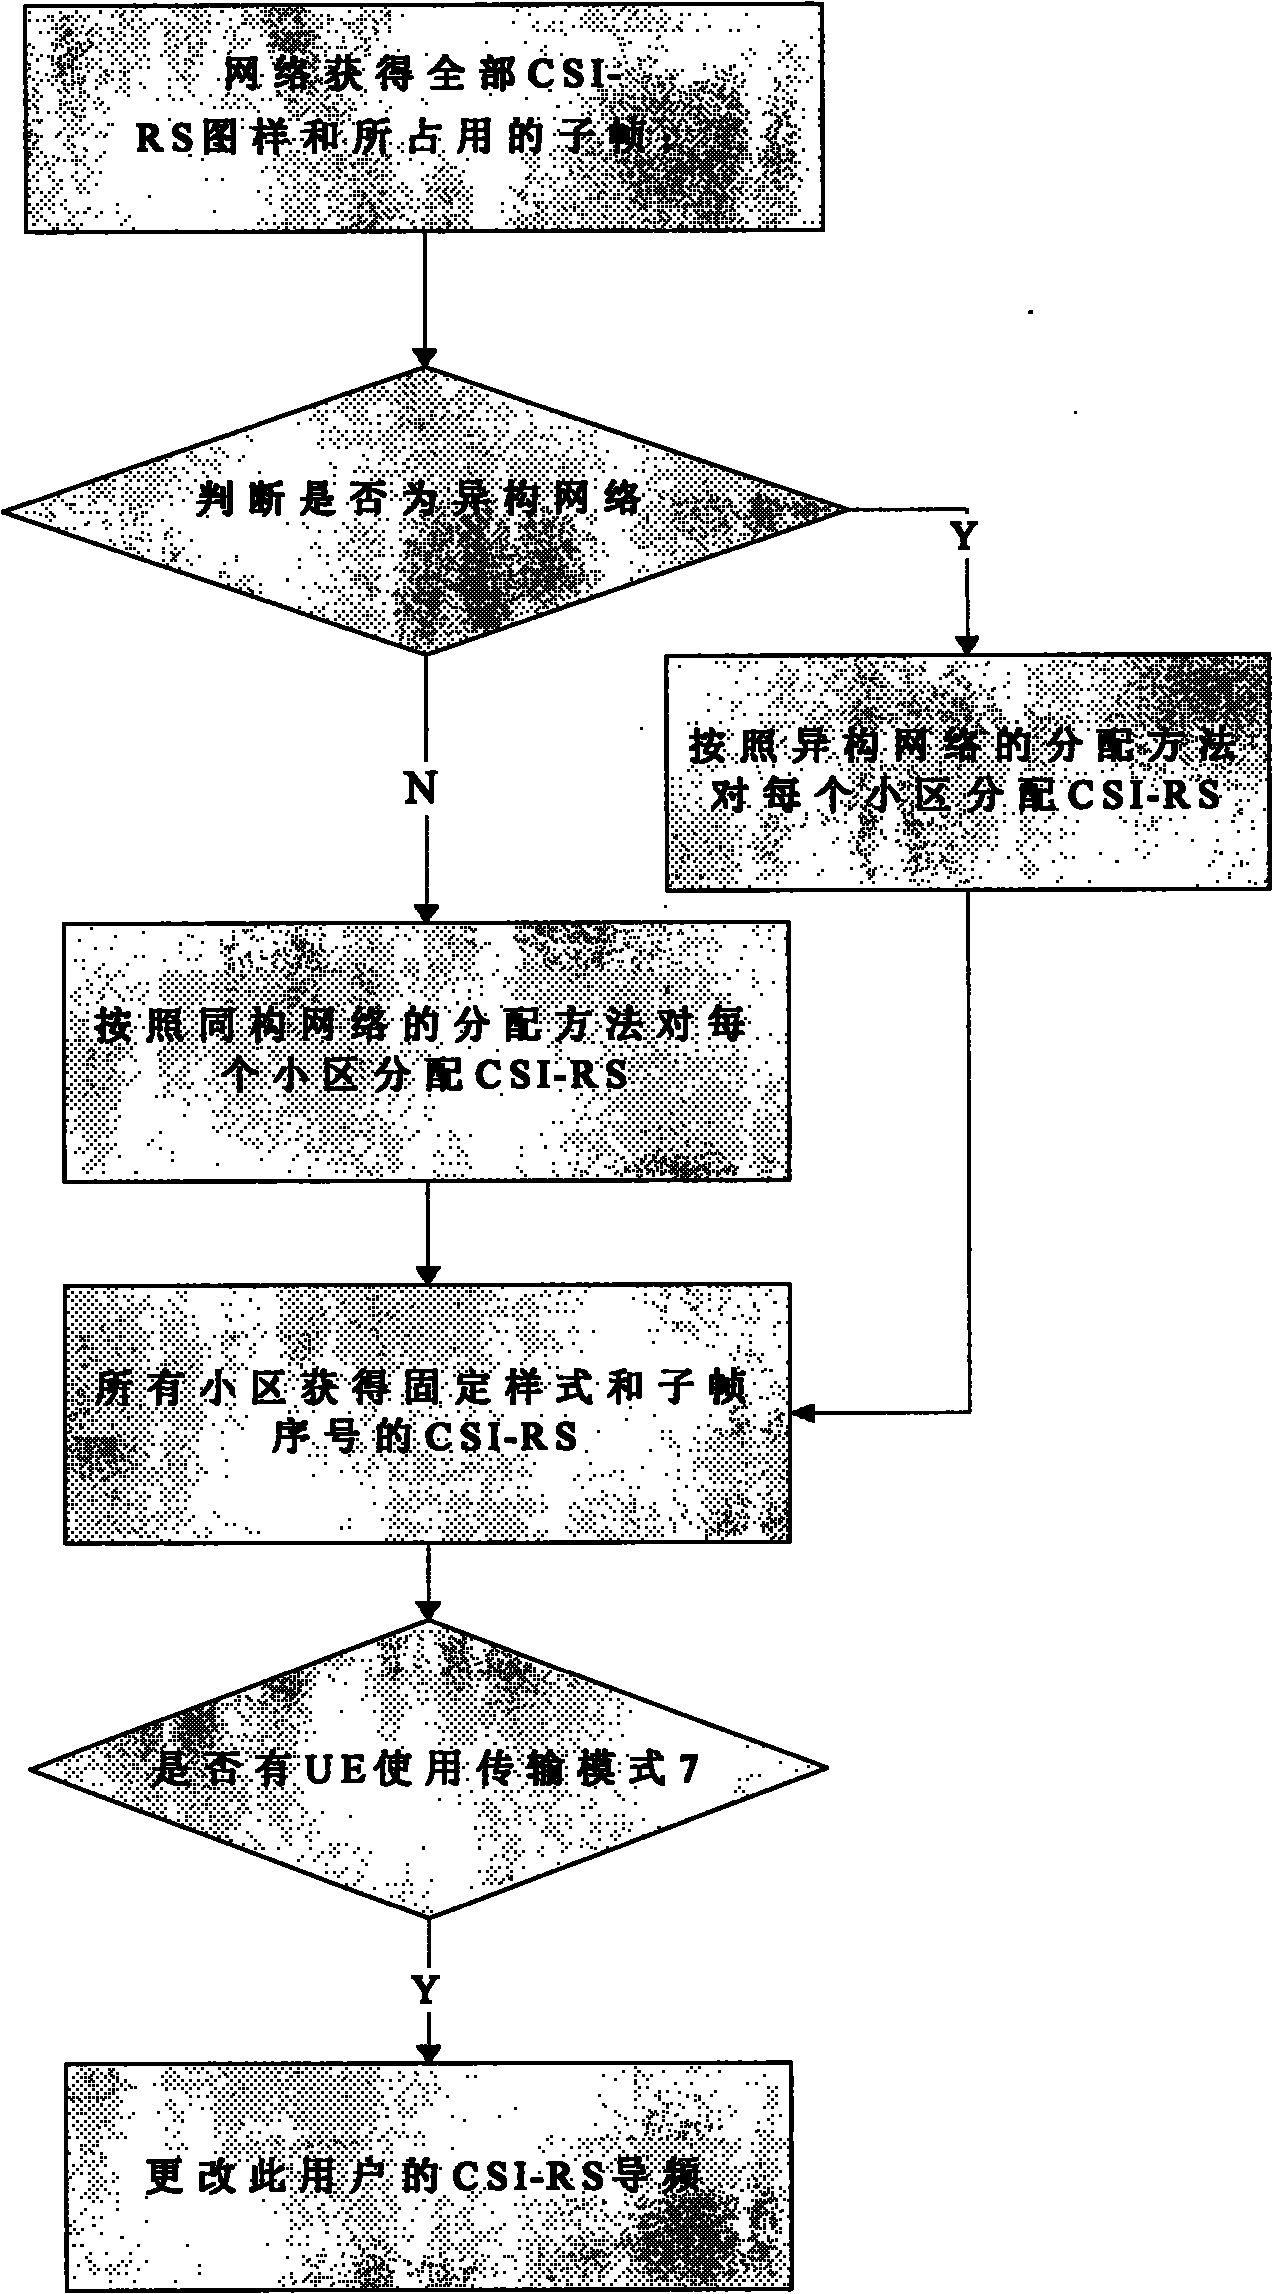 Method for designing channel state information reference signal (CSI-RS) in LTE-A (Long Term Evolution-Advanced) system